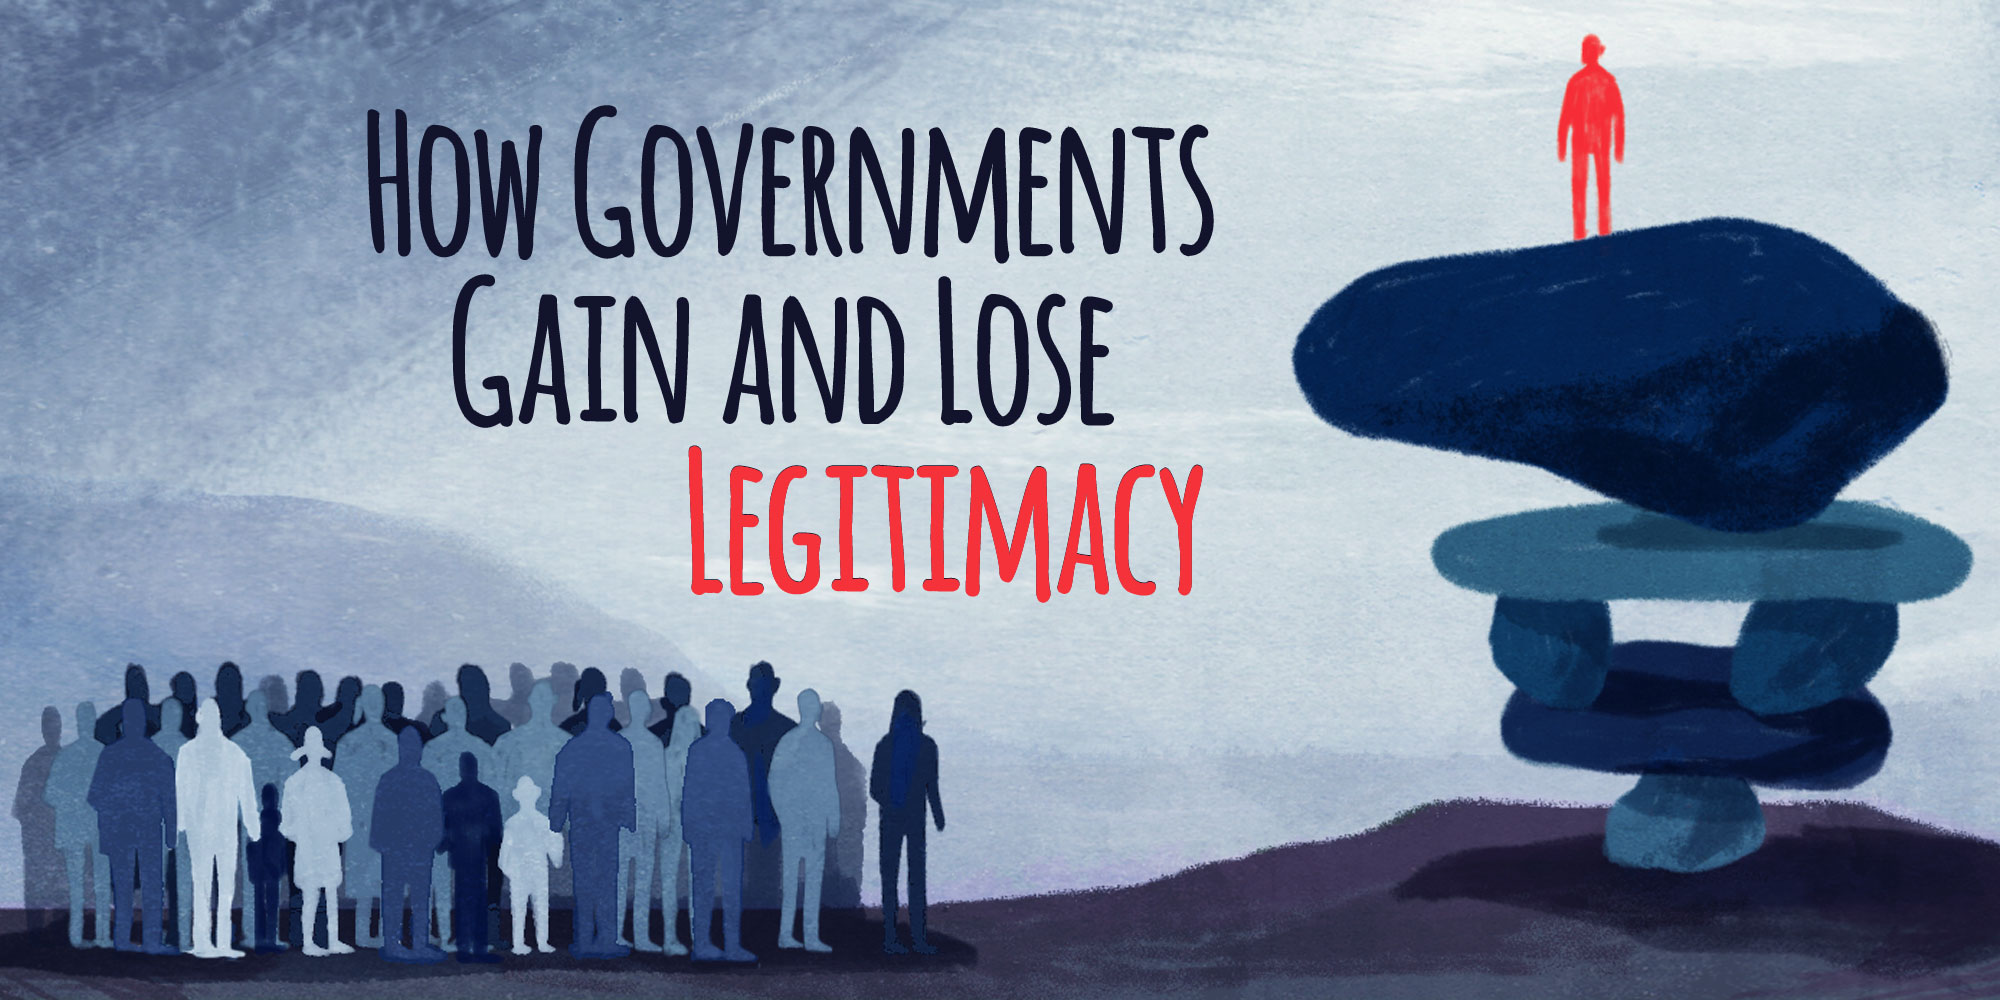 How Governments Gain and Lose Legitimacy